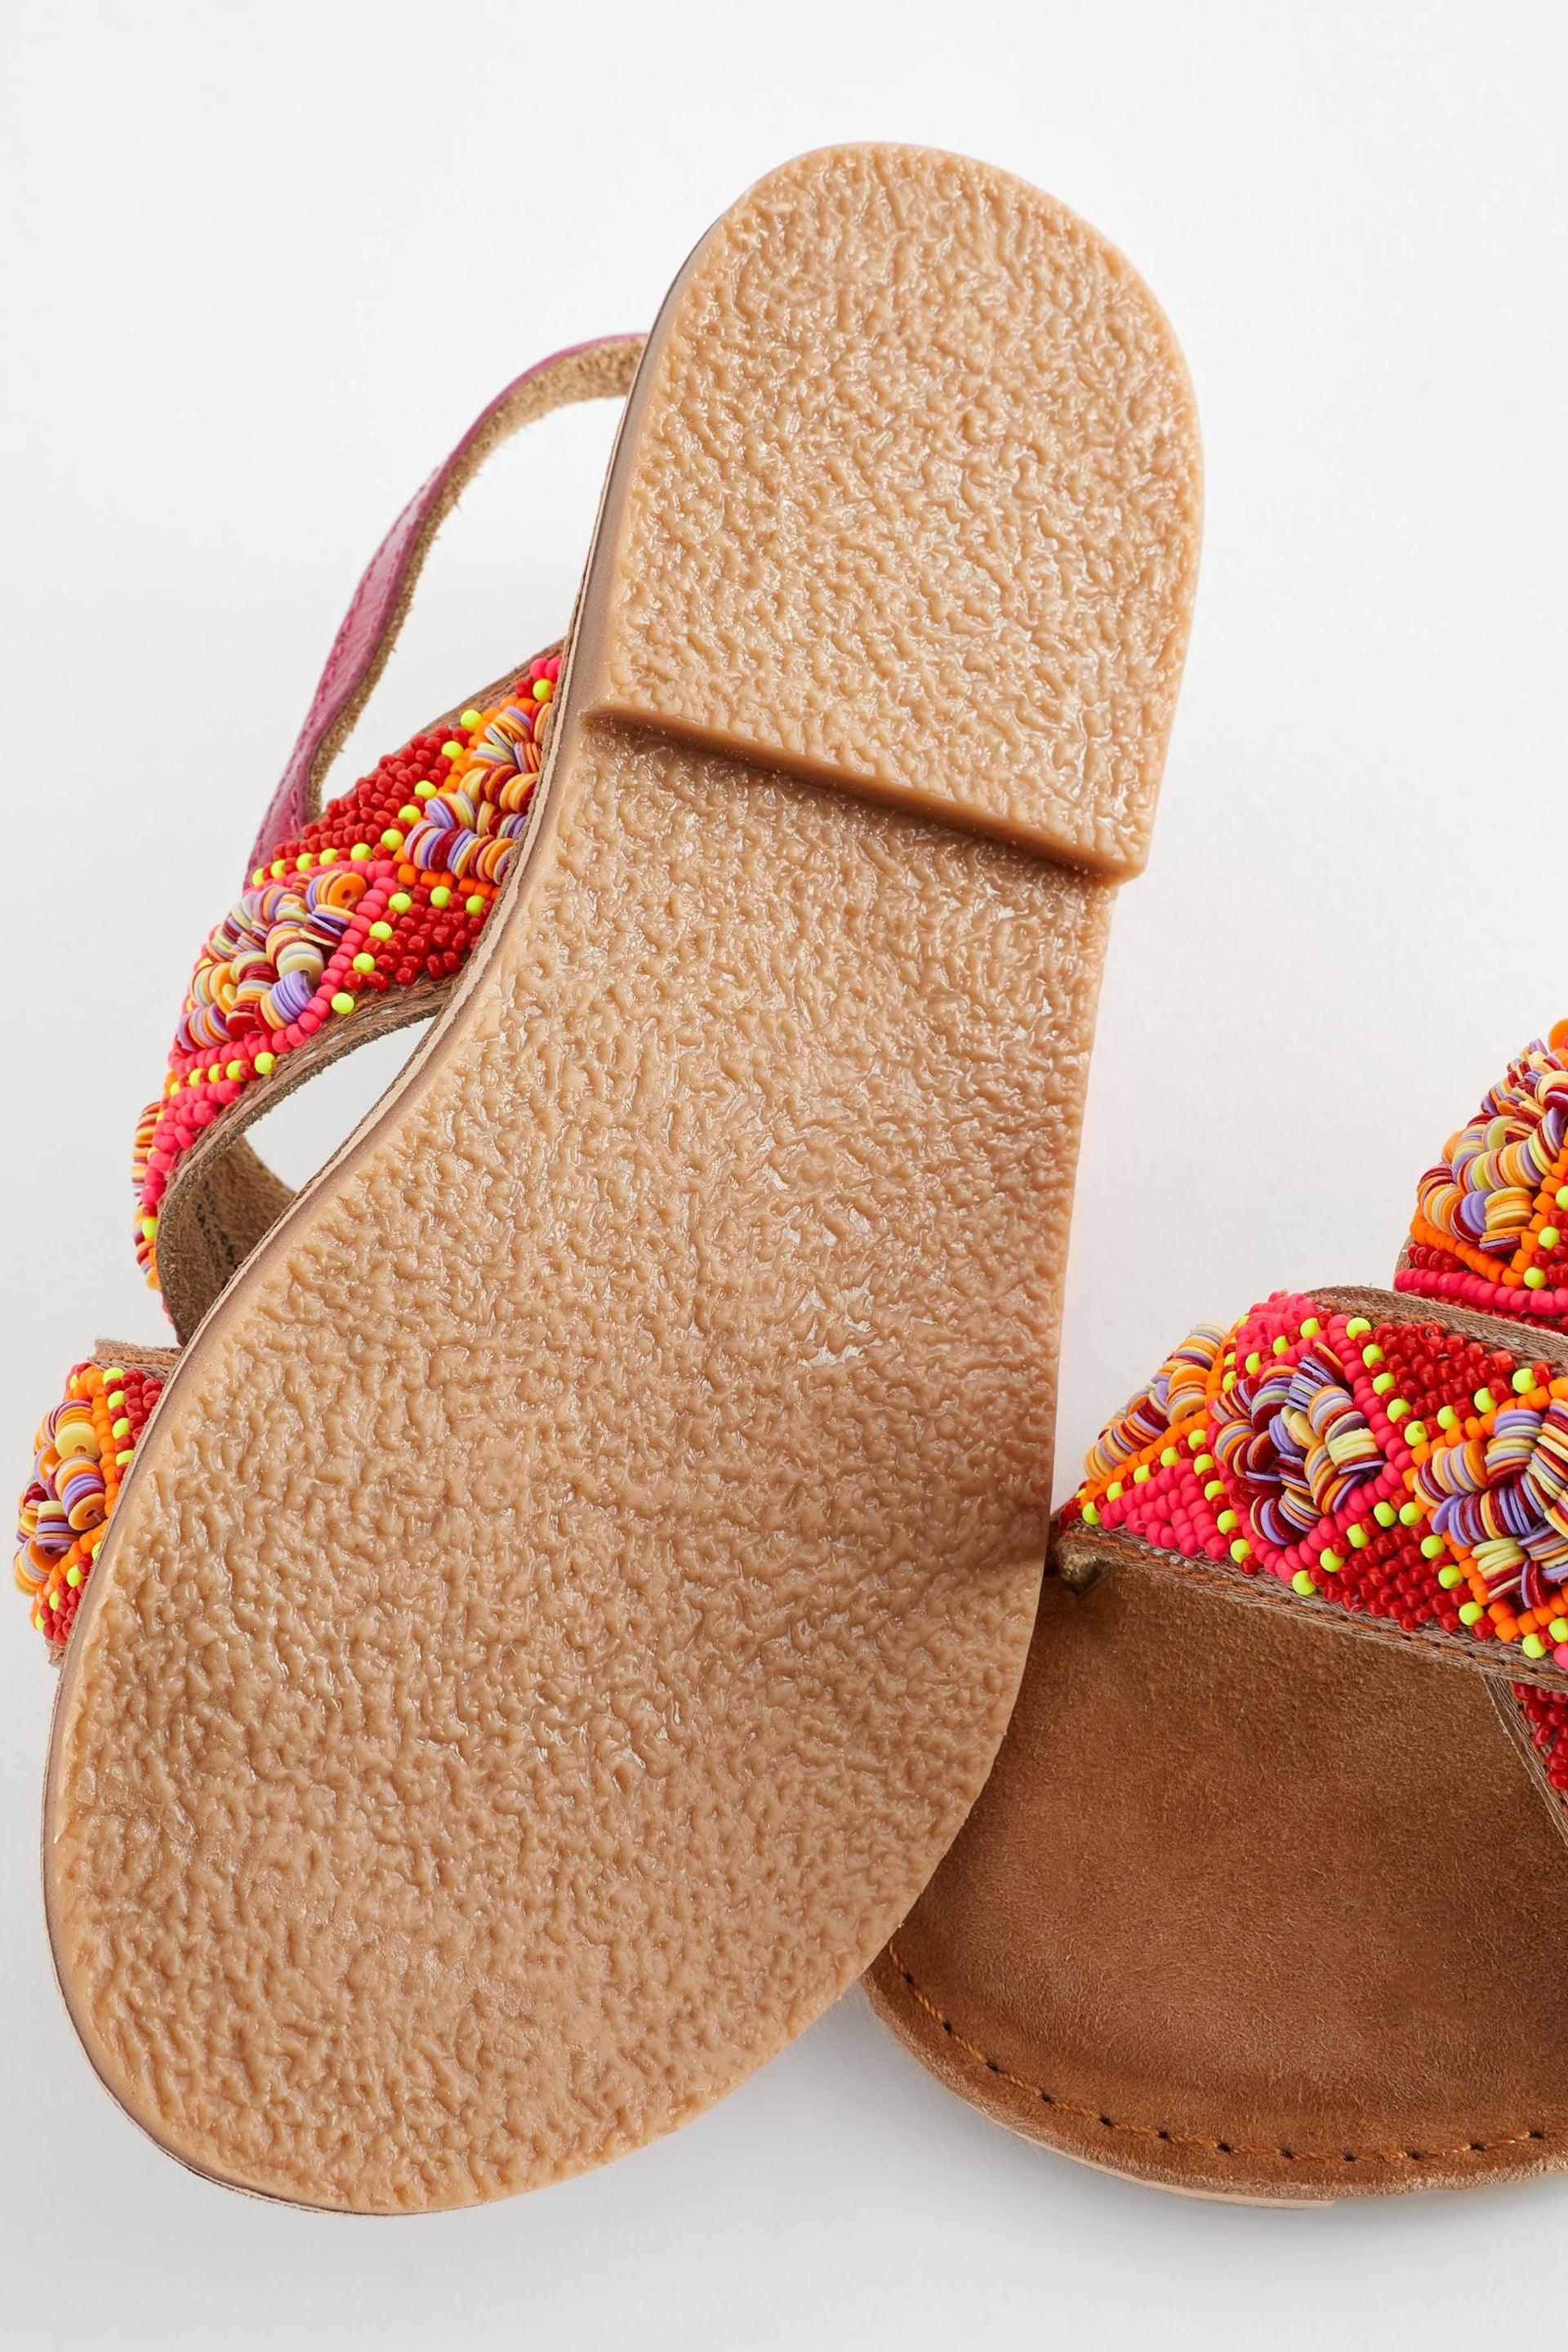 Red Orange Beaded Leather Cross Strap Sandals - Image 4 of 6